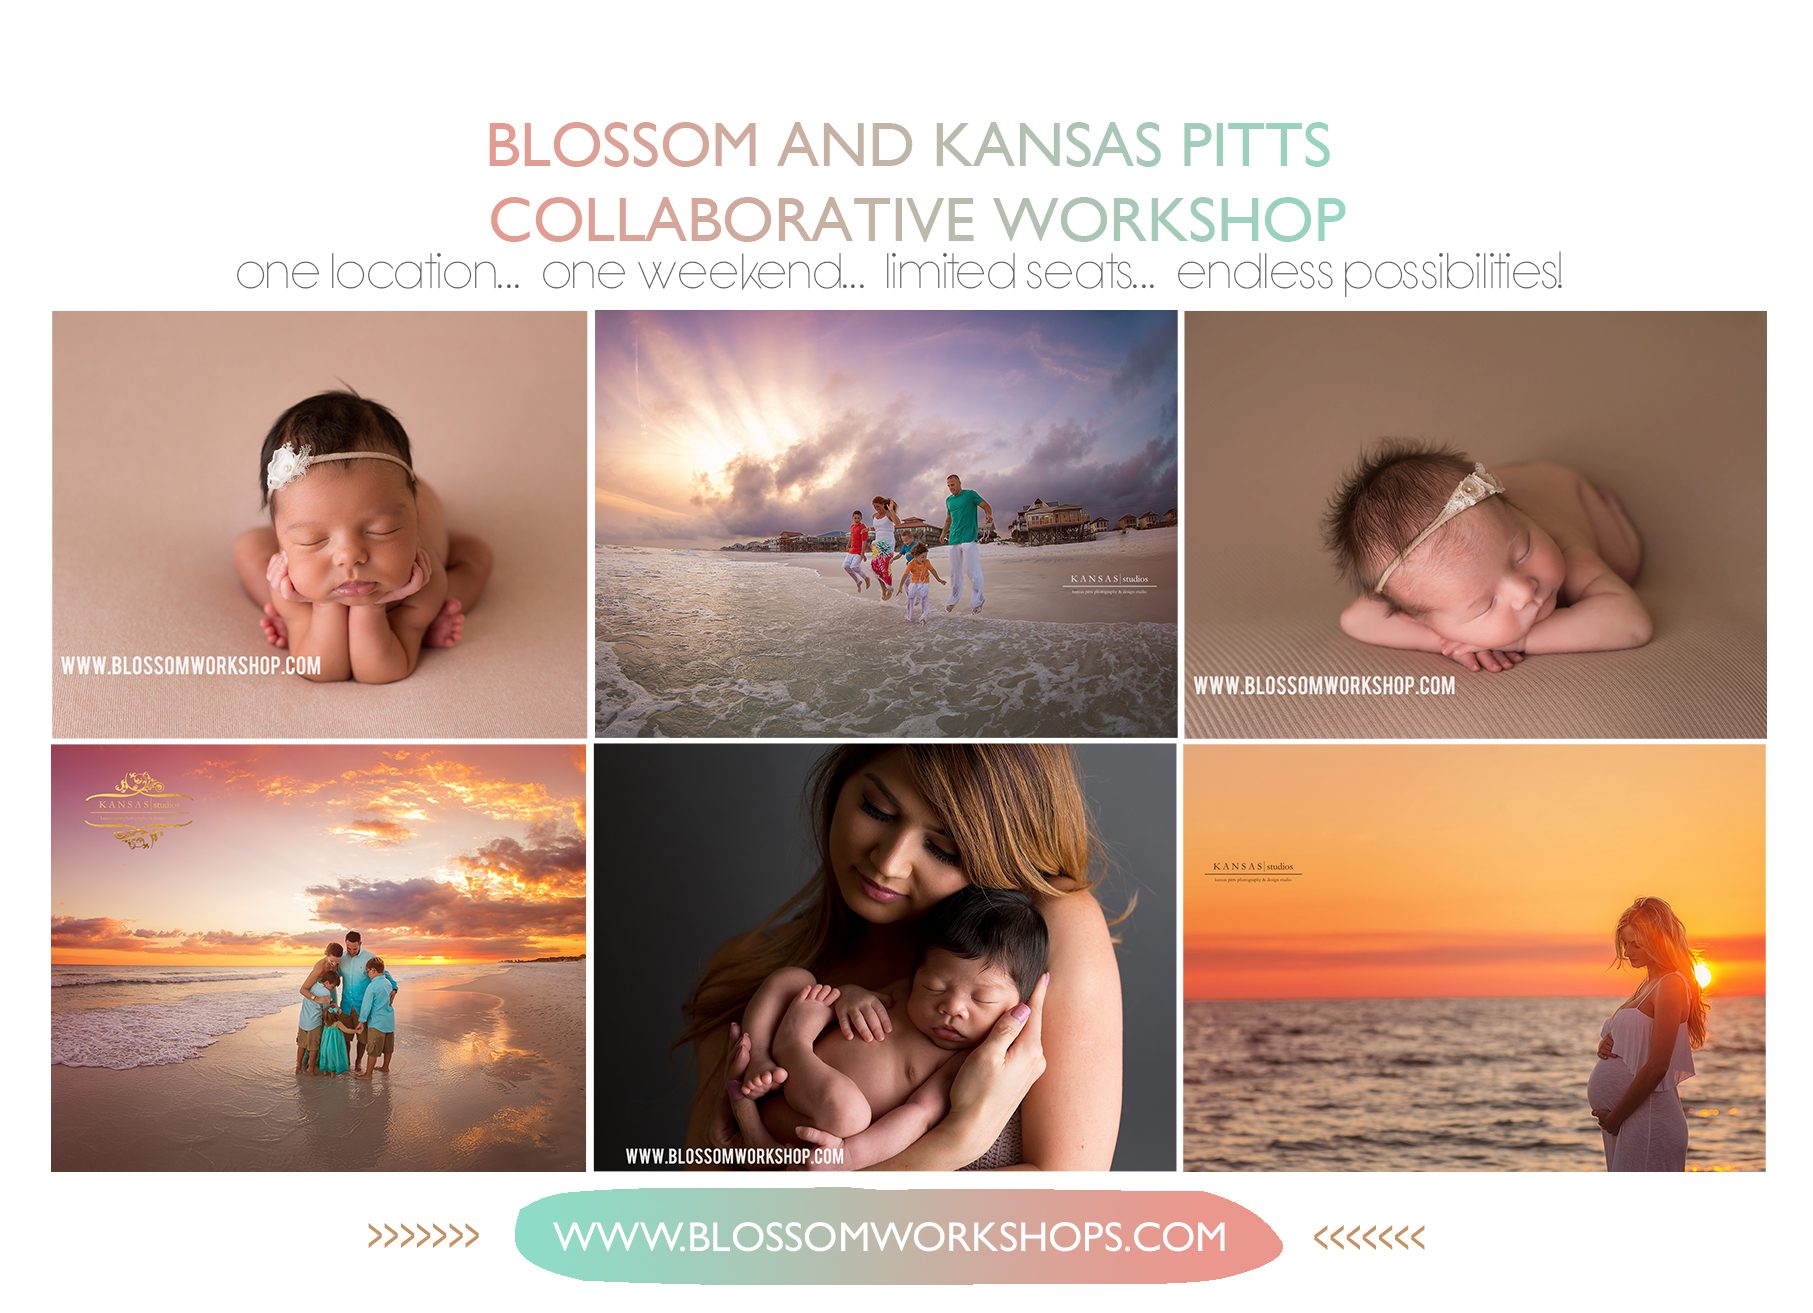 BLOSSOM AND KANSAS PITTS | COLLABORATIVE WORKSHOP